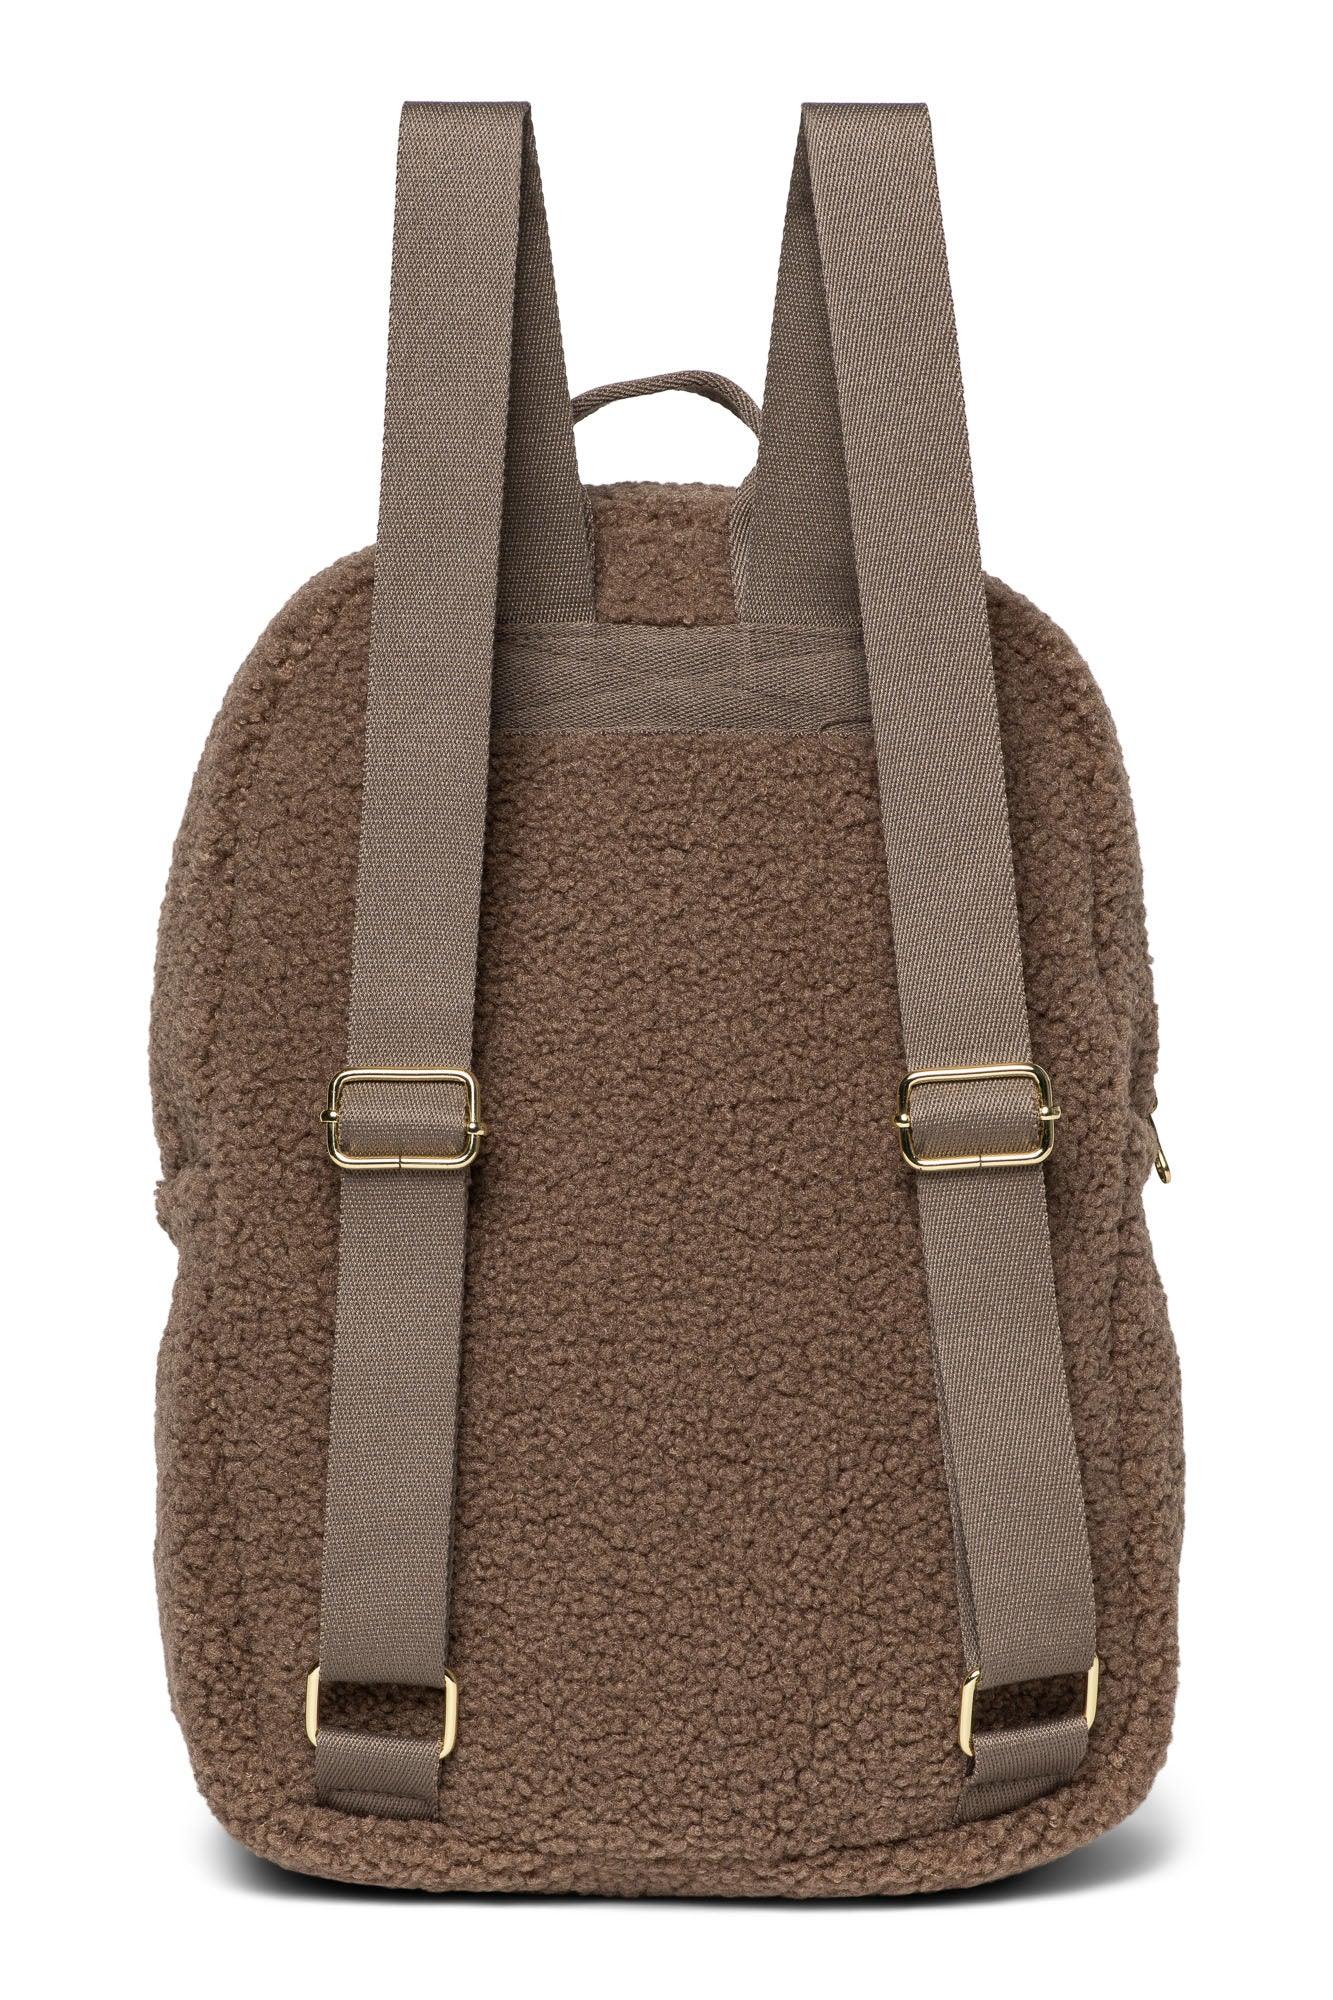 Midi Rucksack Teddy 'Brown' - The Little One • Family.Concept.Store. 